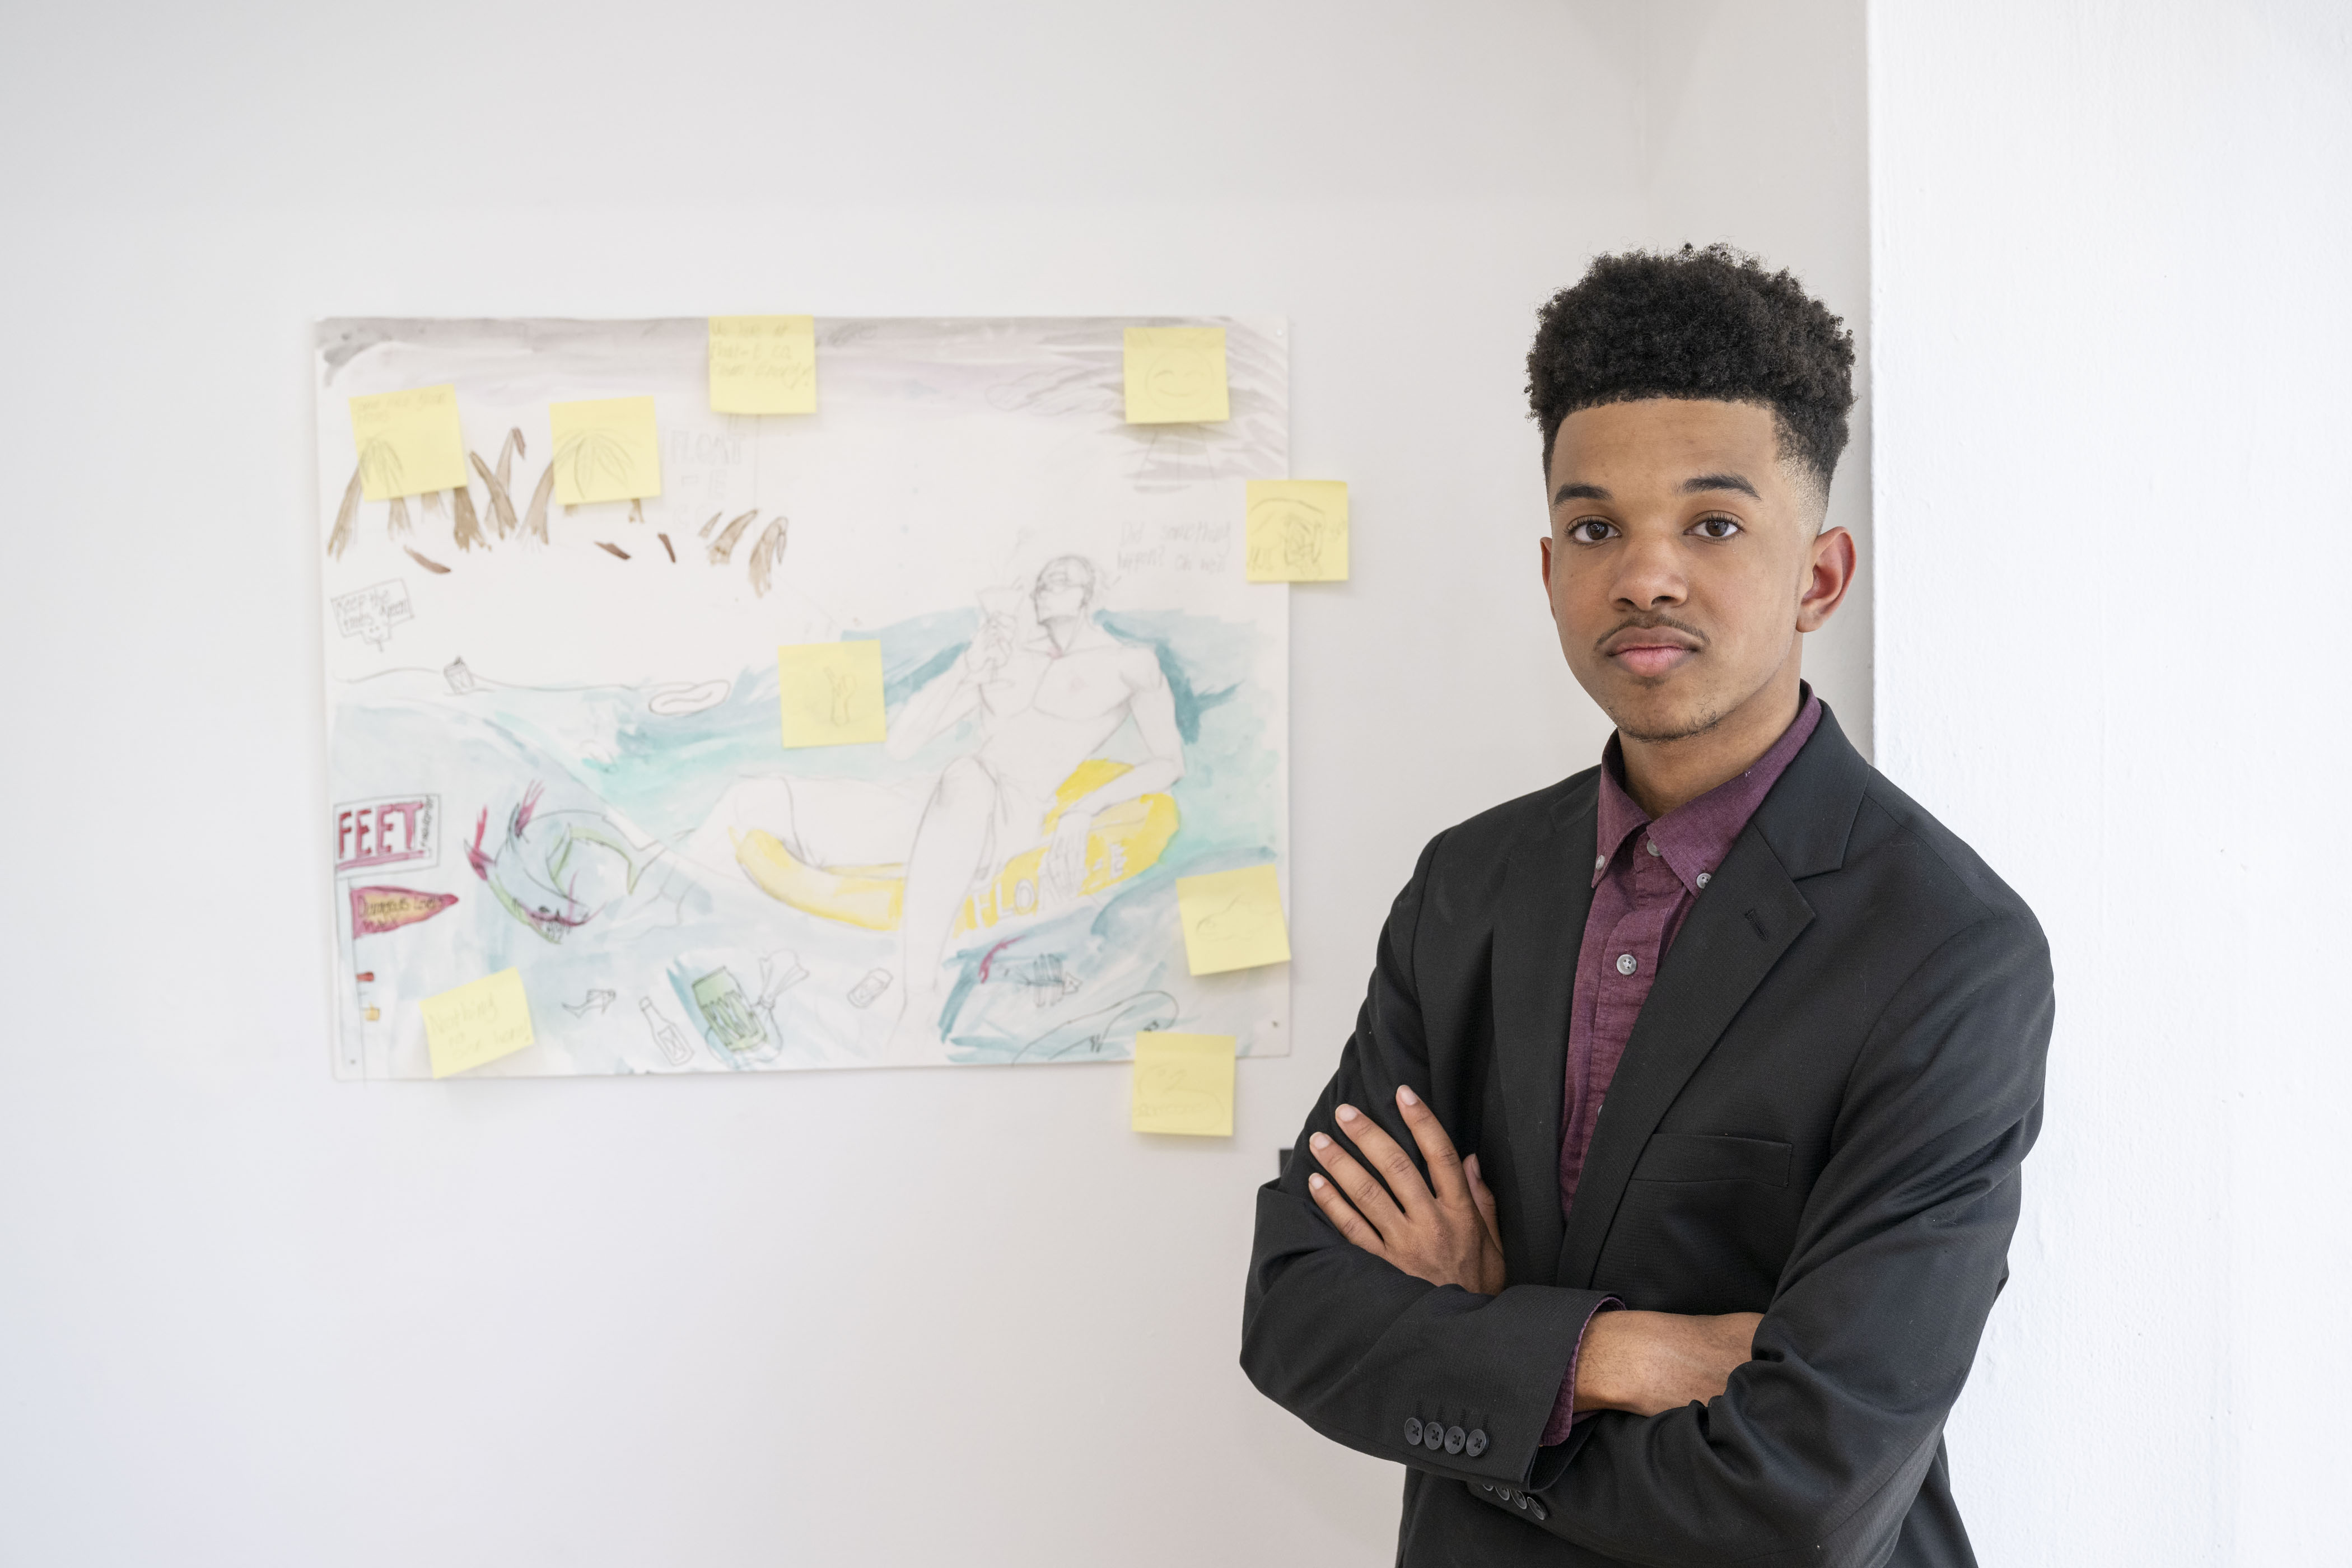 LEAP student Jaden S standing next to a drawing with watercolor accents he created